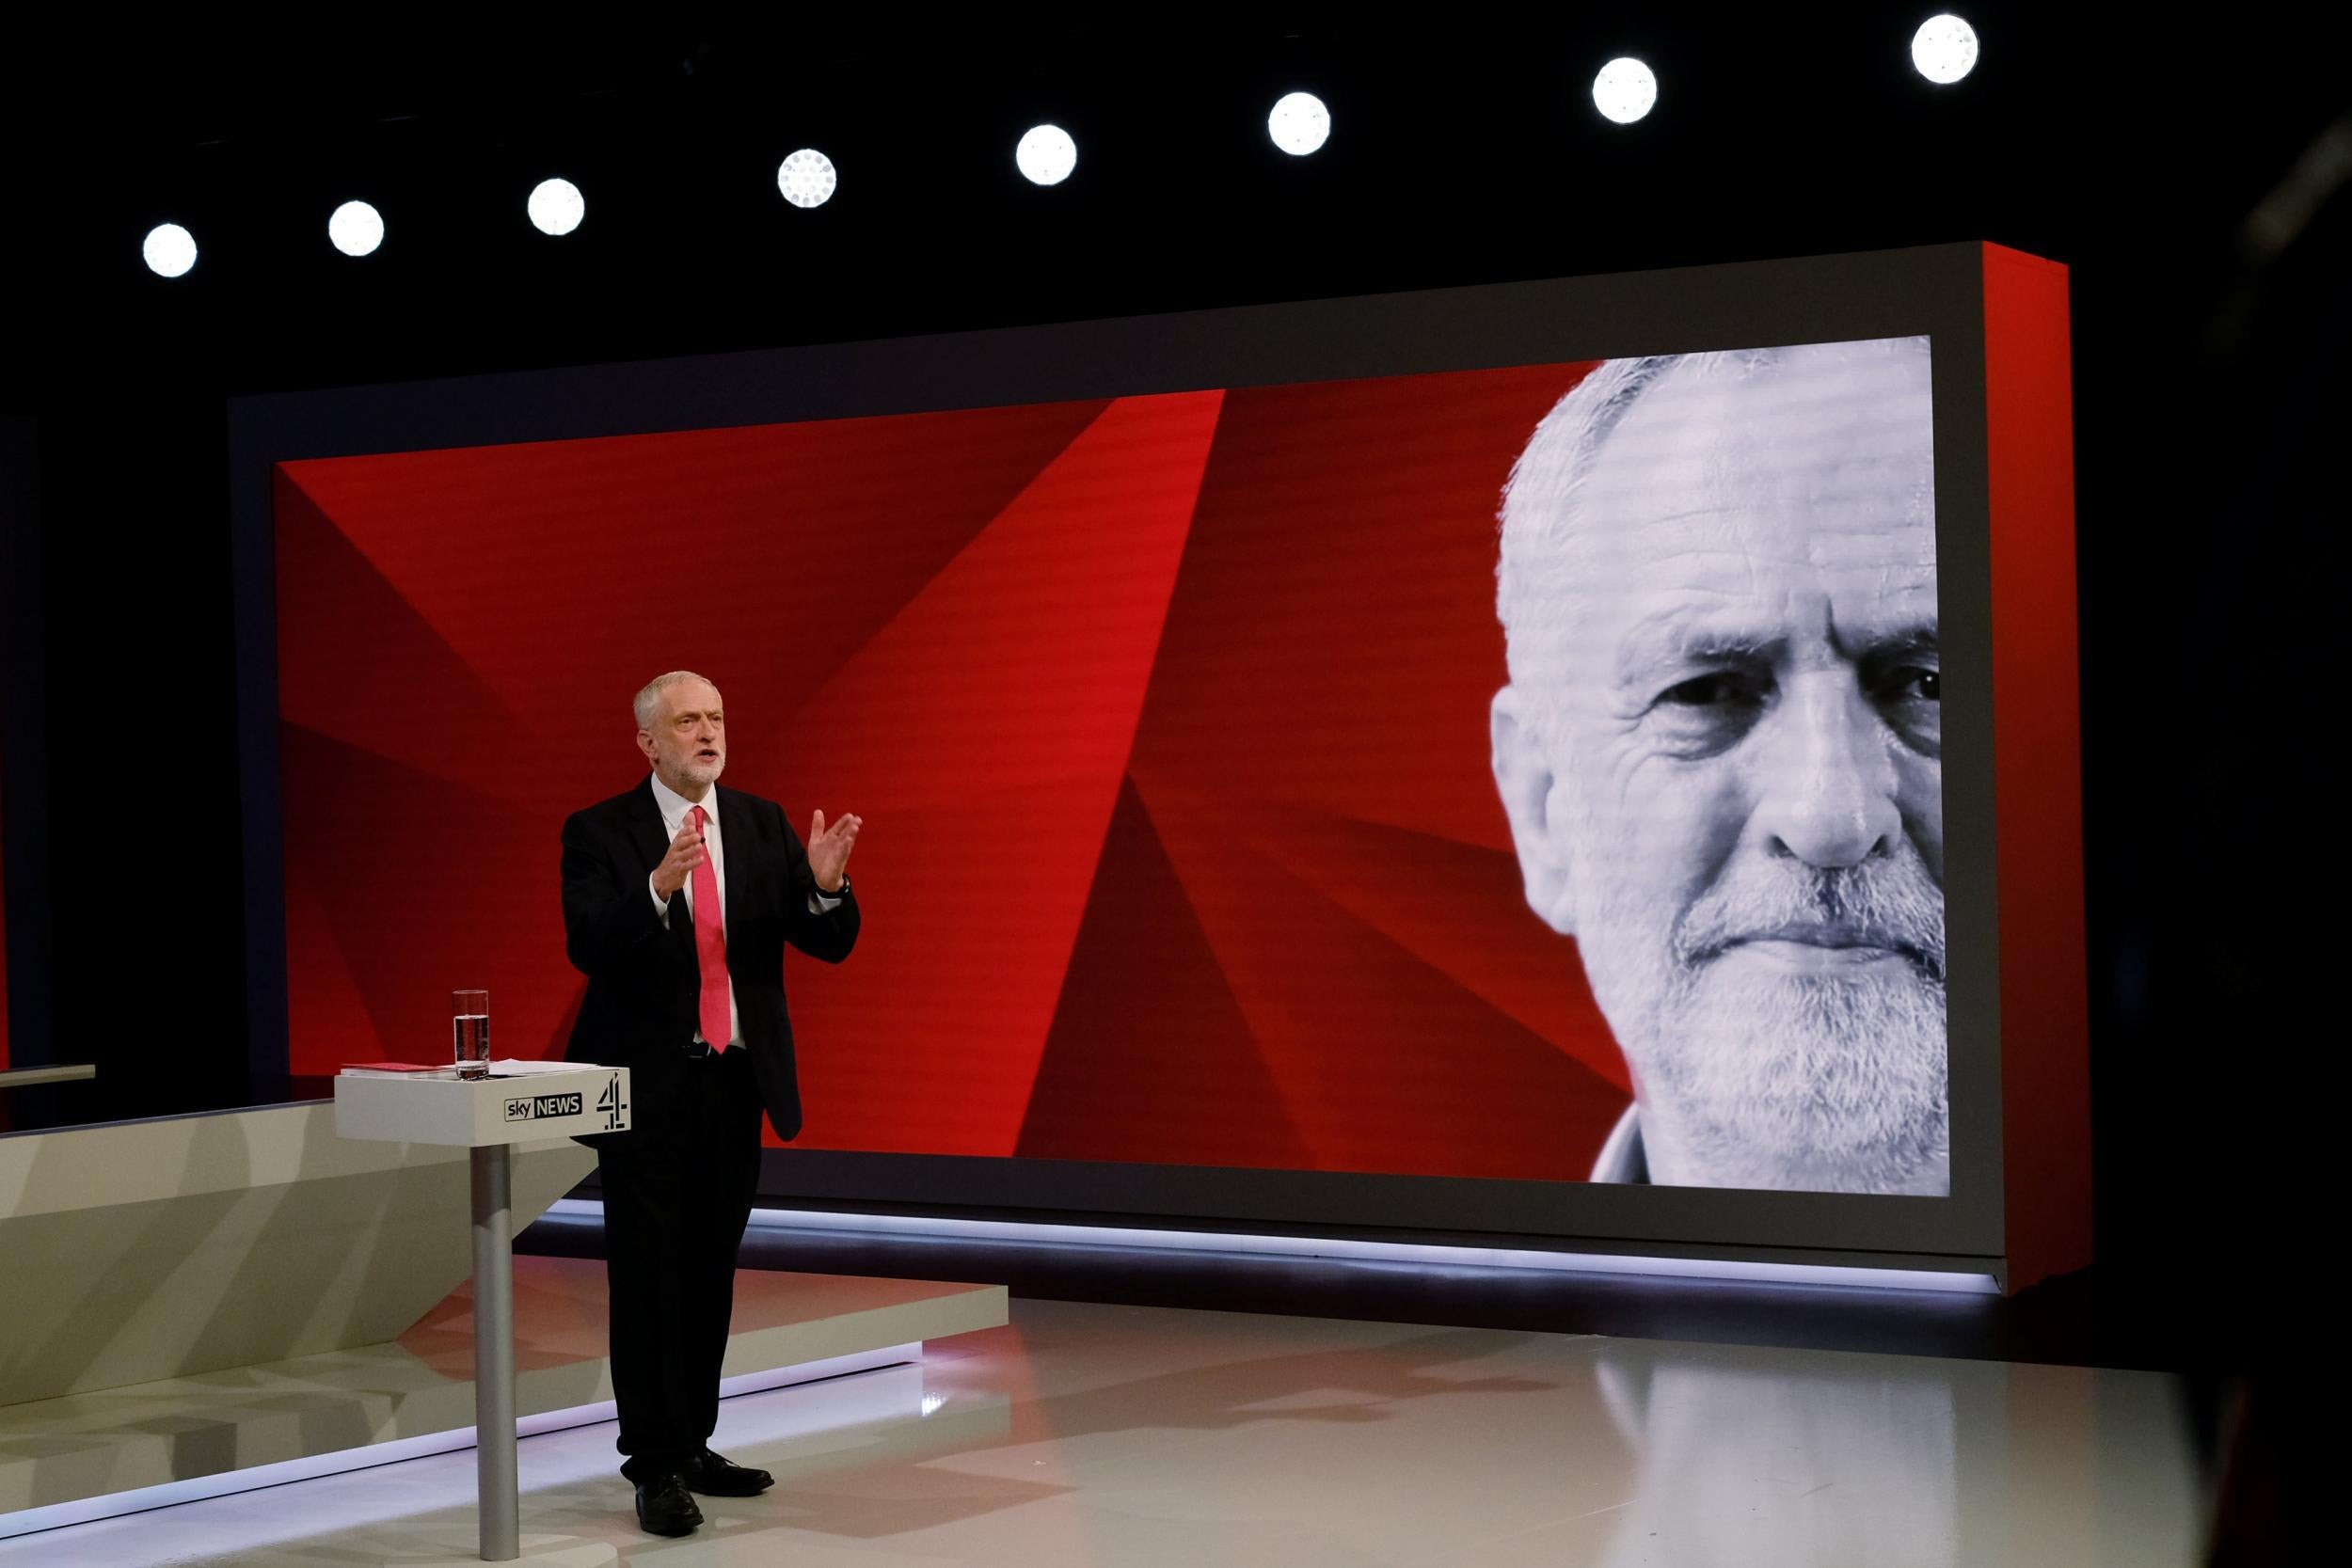 The Labour leader takes questions during the Paxman debate. Since the campaign begun he has outperformed most pundits’ expectations